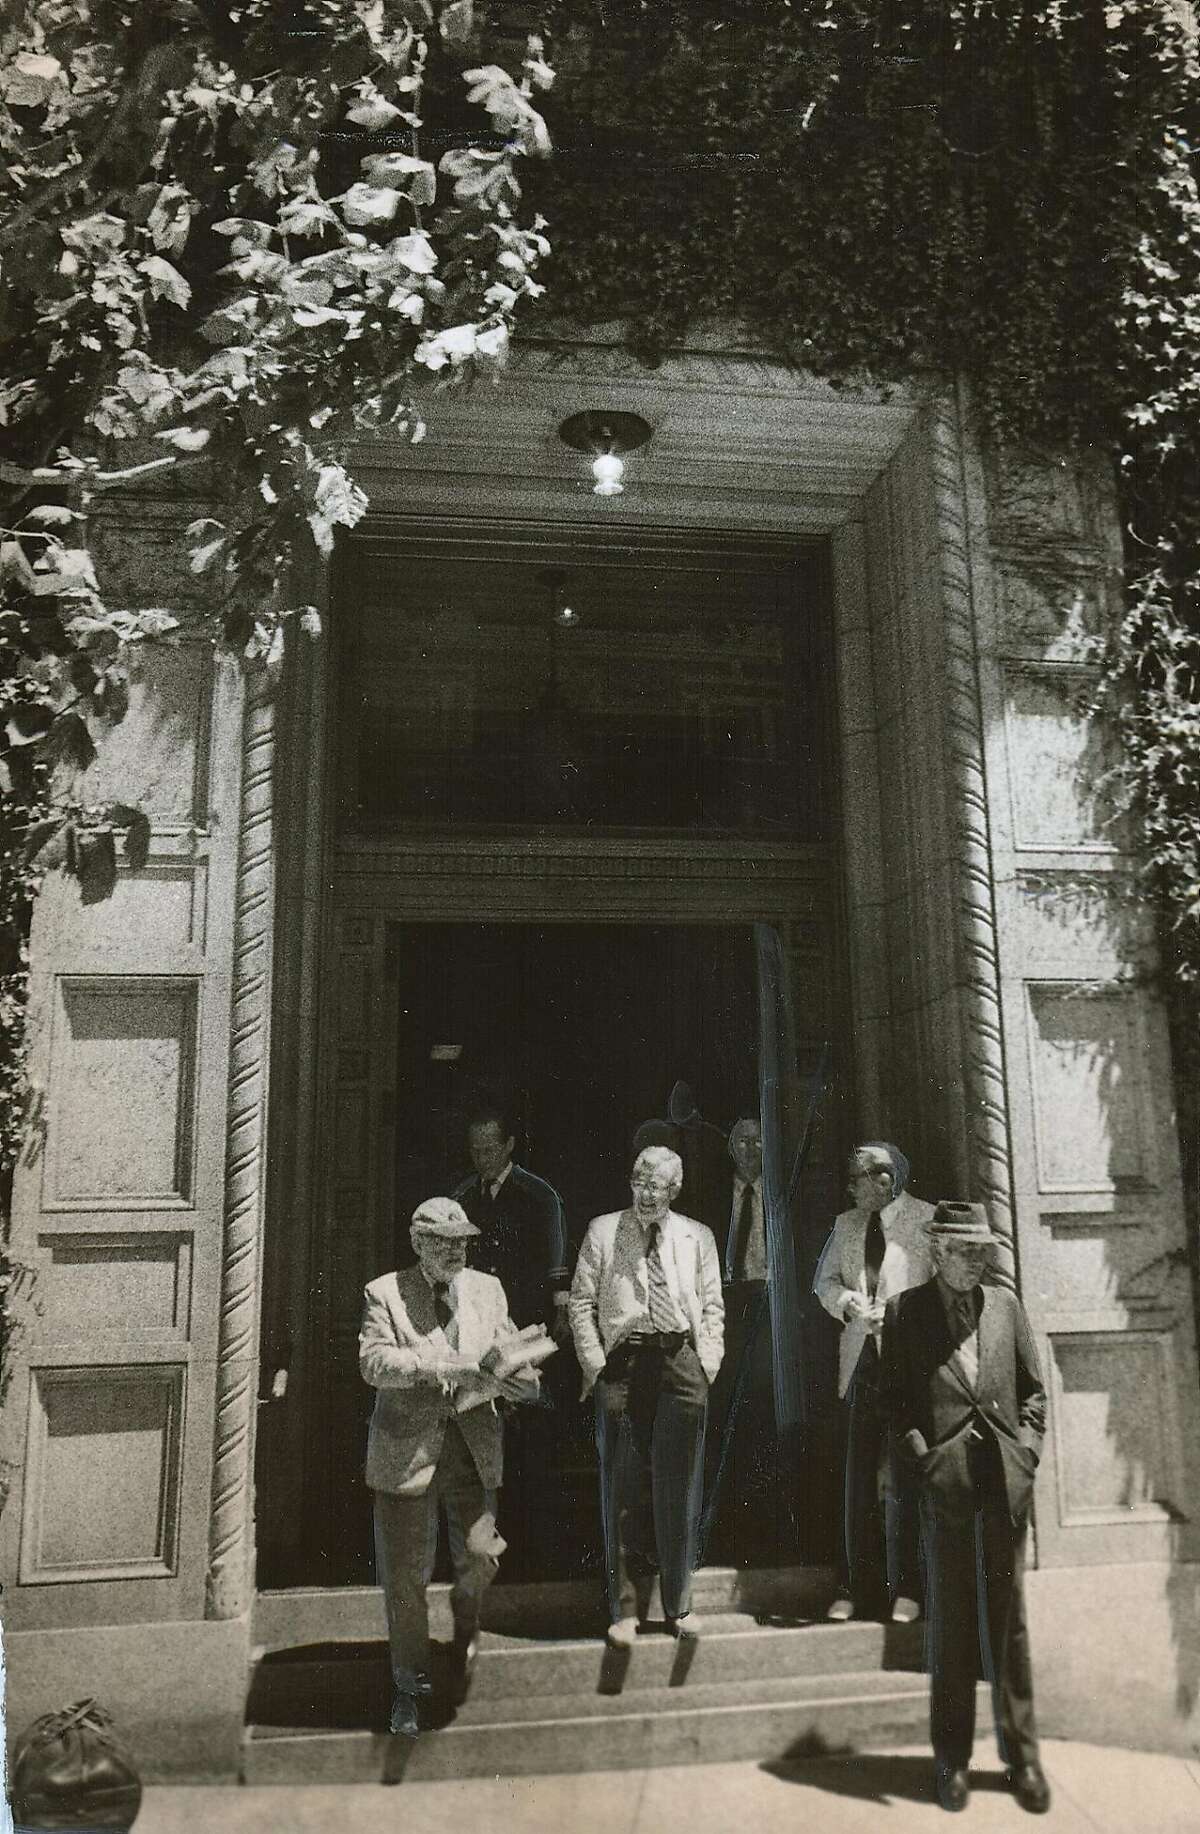 The Bohemian club on 624 Taylor Street in San Francisco on July 24, 1975